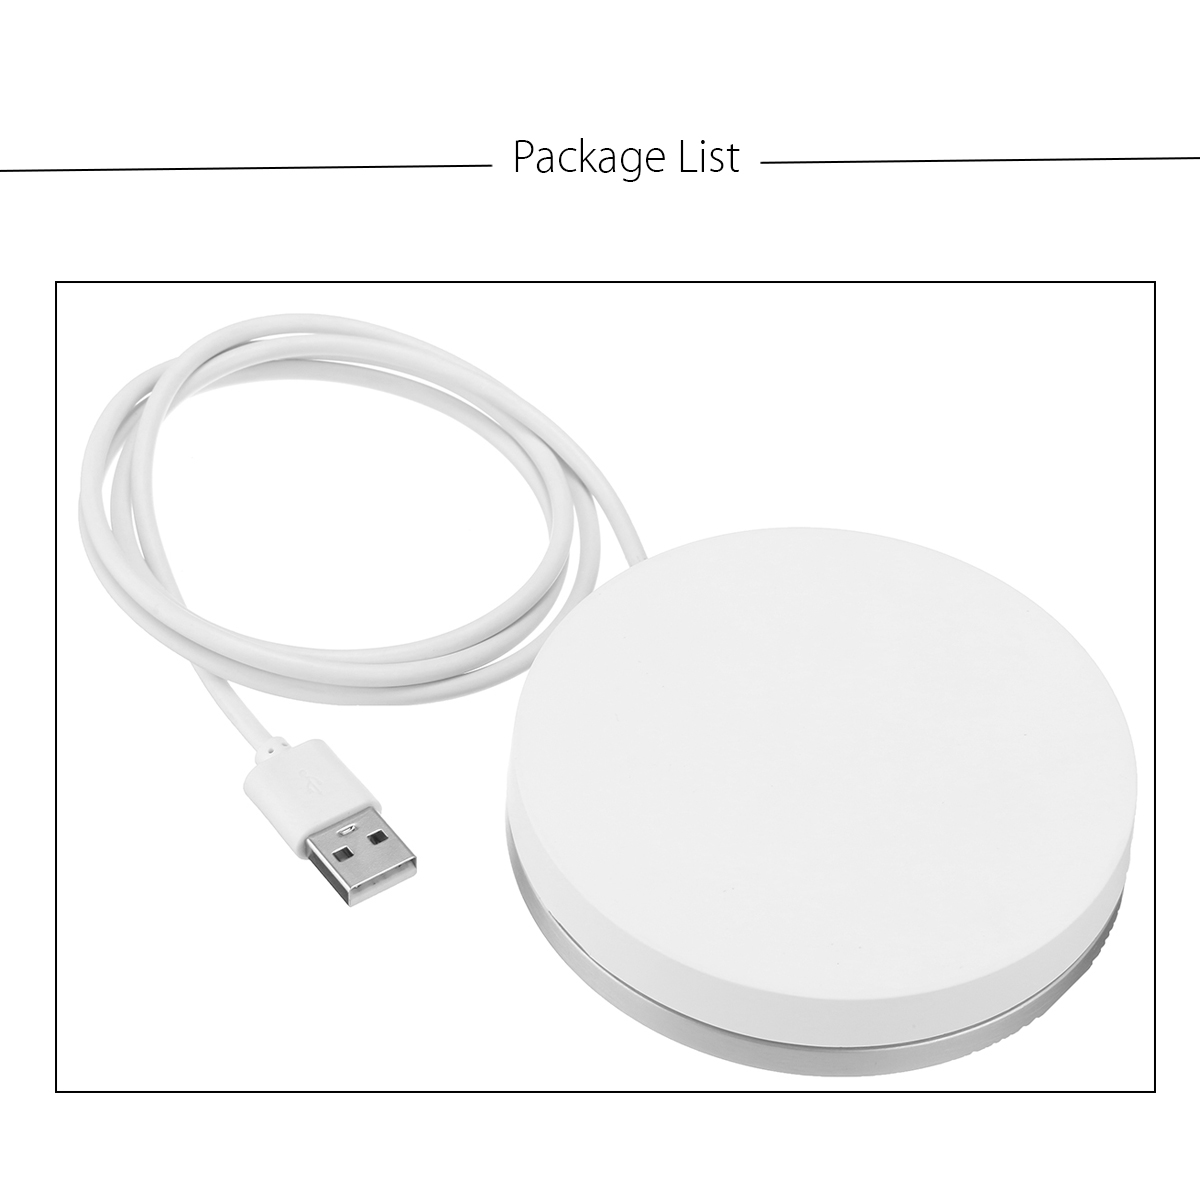 10W-Fast-Qi-Wireless-Charging-Dock-Charger-Pad-Mat-Aluminum-With-LED-Light-For-iphone-X-88Plus-Sams-1246367